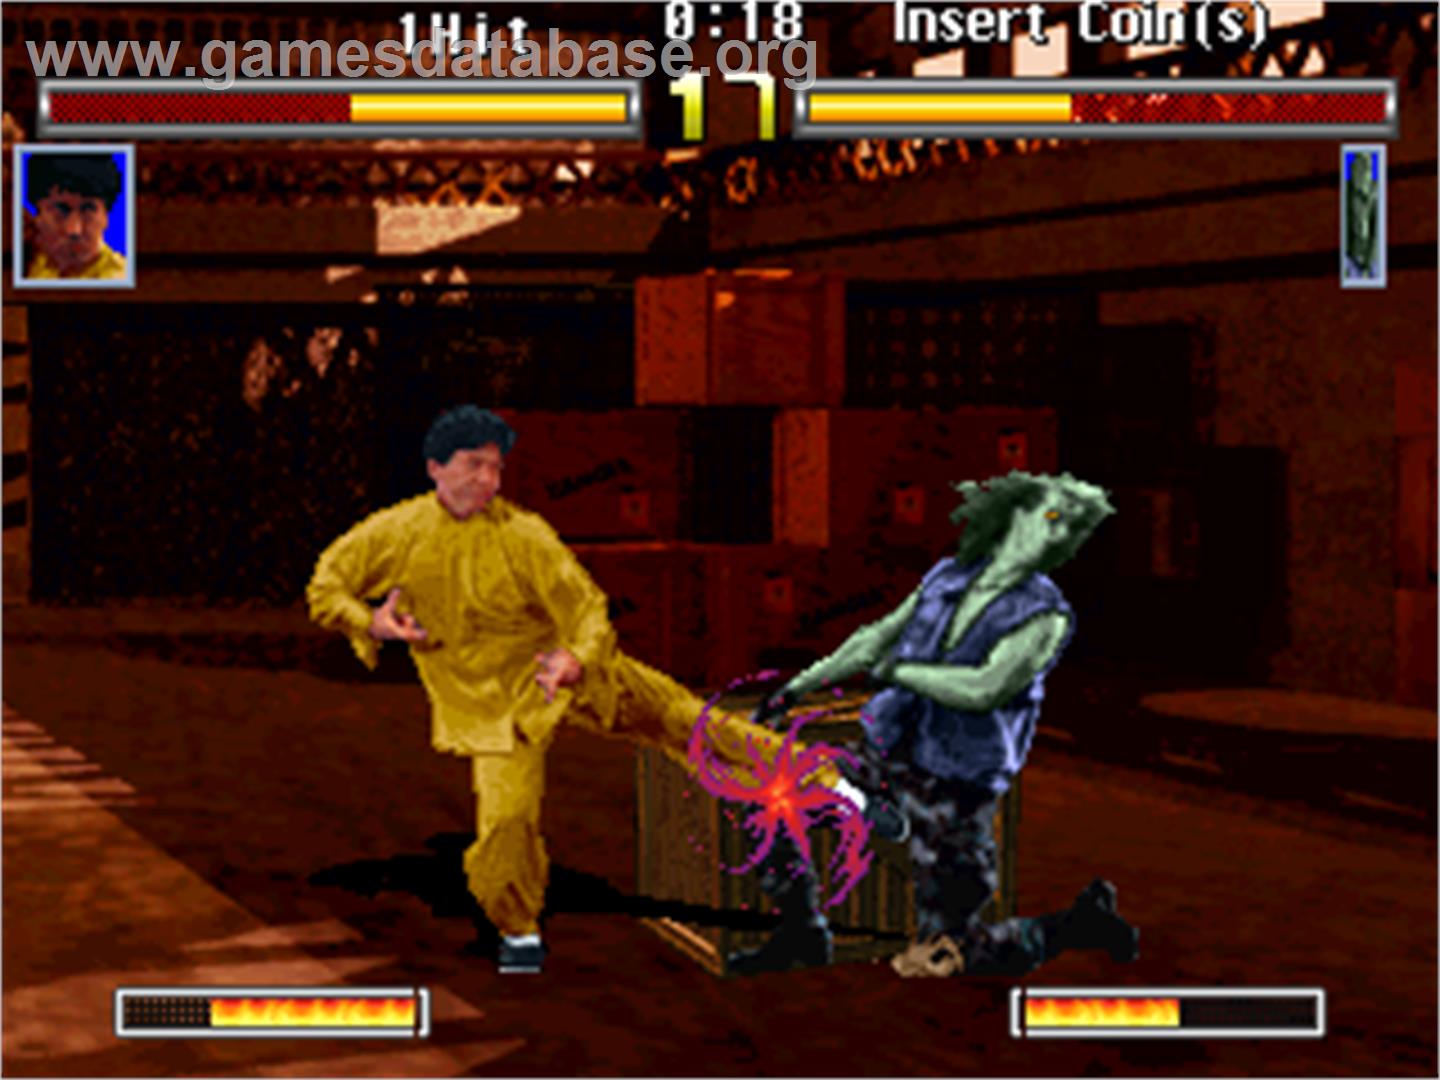 Jackie Chan in Fists of Fire - Arcade - Artwork - In Game